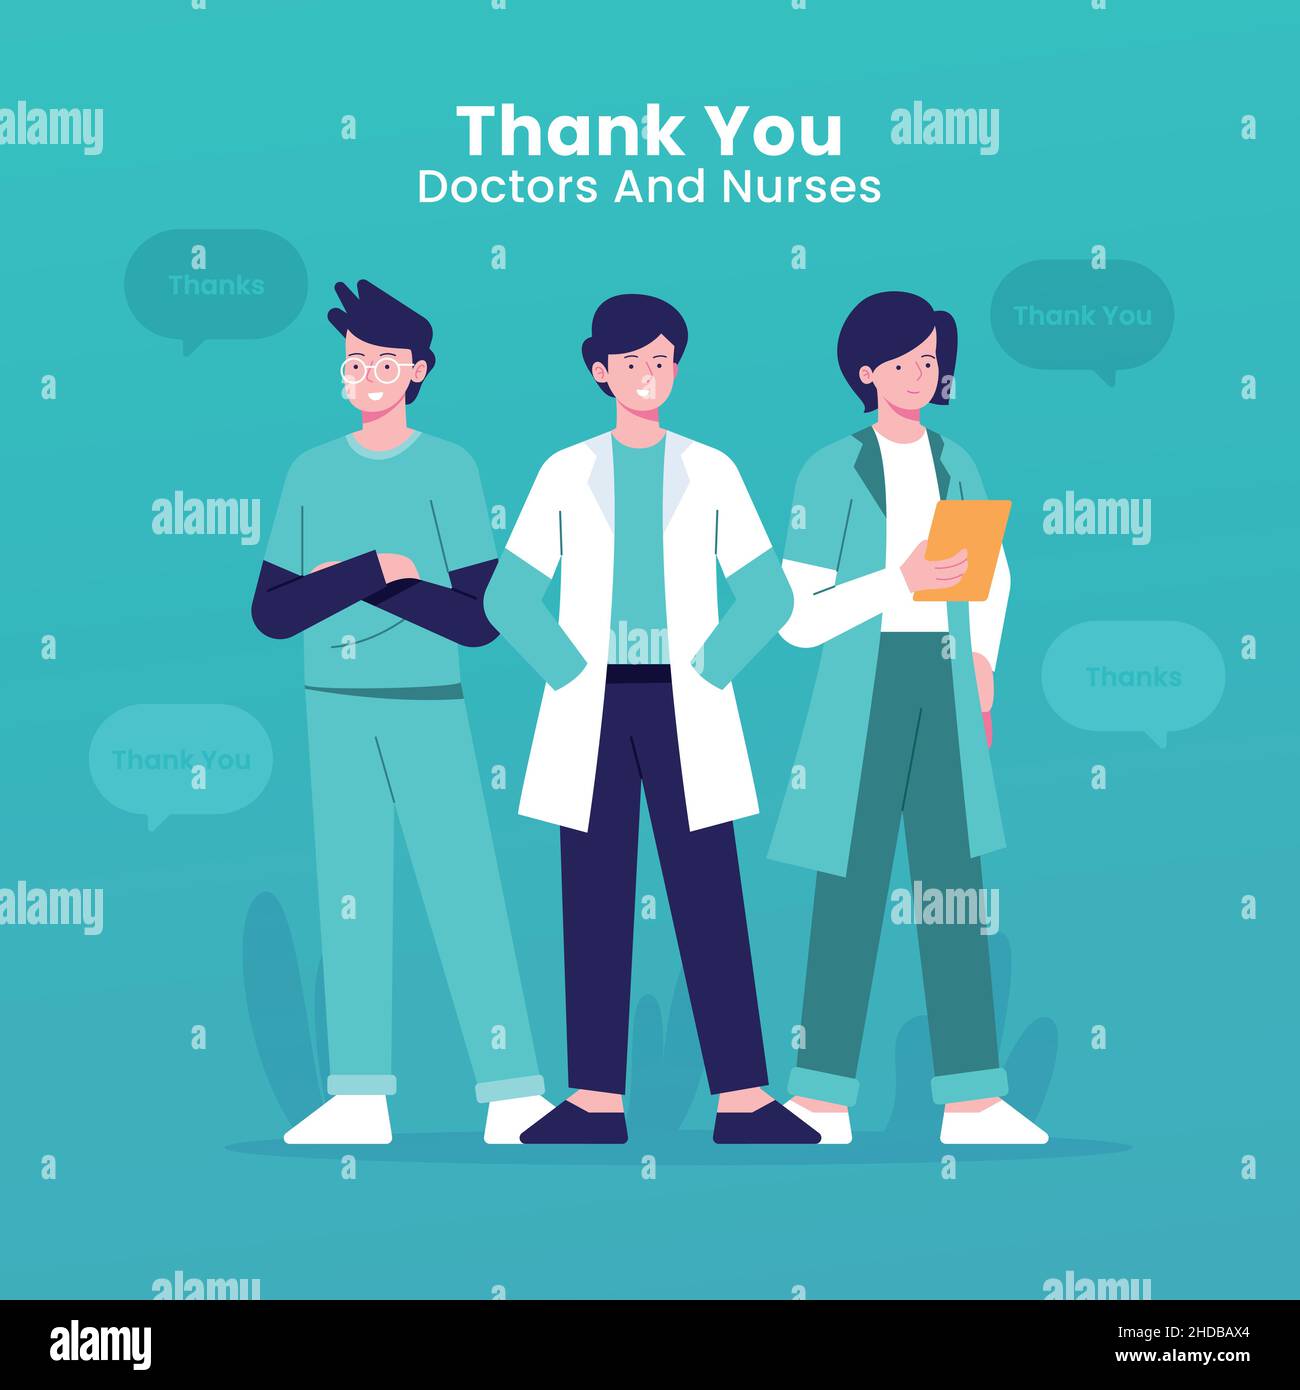 Thank you doctors and nurses. Thank you brave healthcare workers. Doctor is a hero. Medical personnel team for fighting the coronavirus. Stock Vector